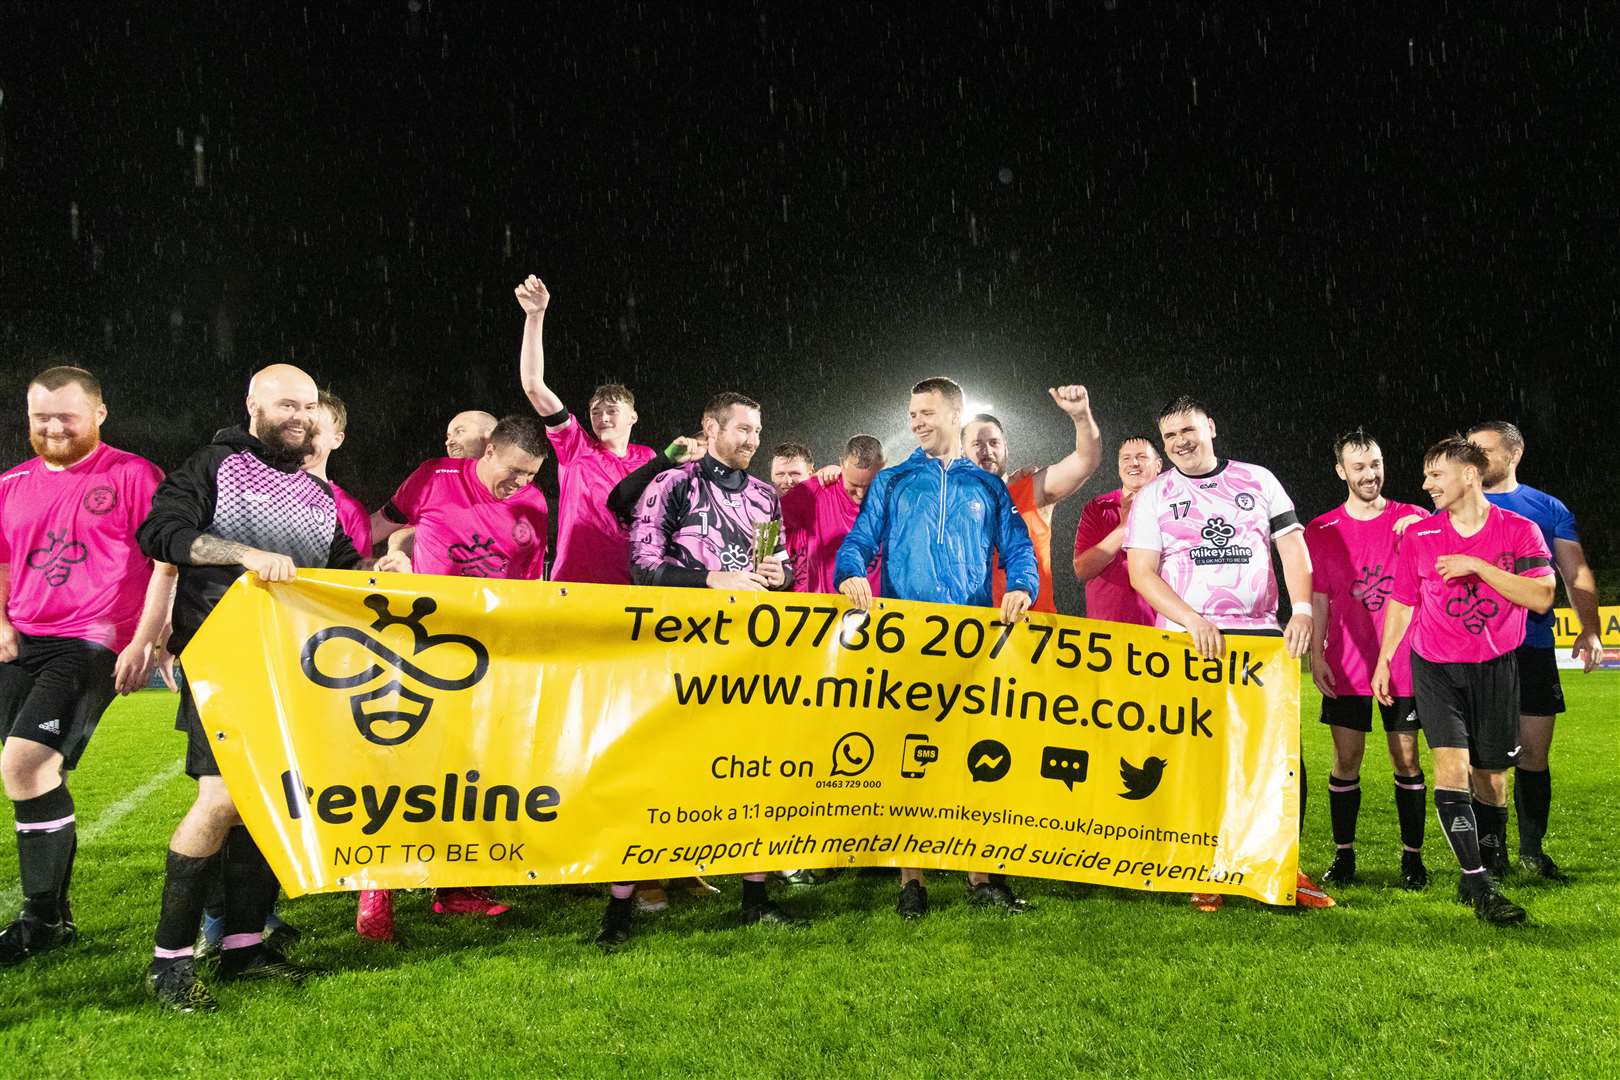 We are the champions. Moray Mental Health FC lift the Mikeysline Cup.